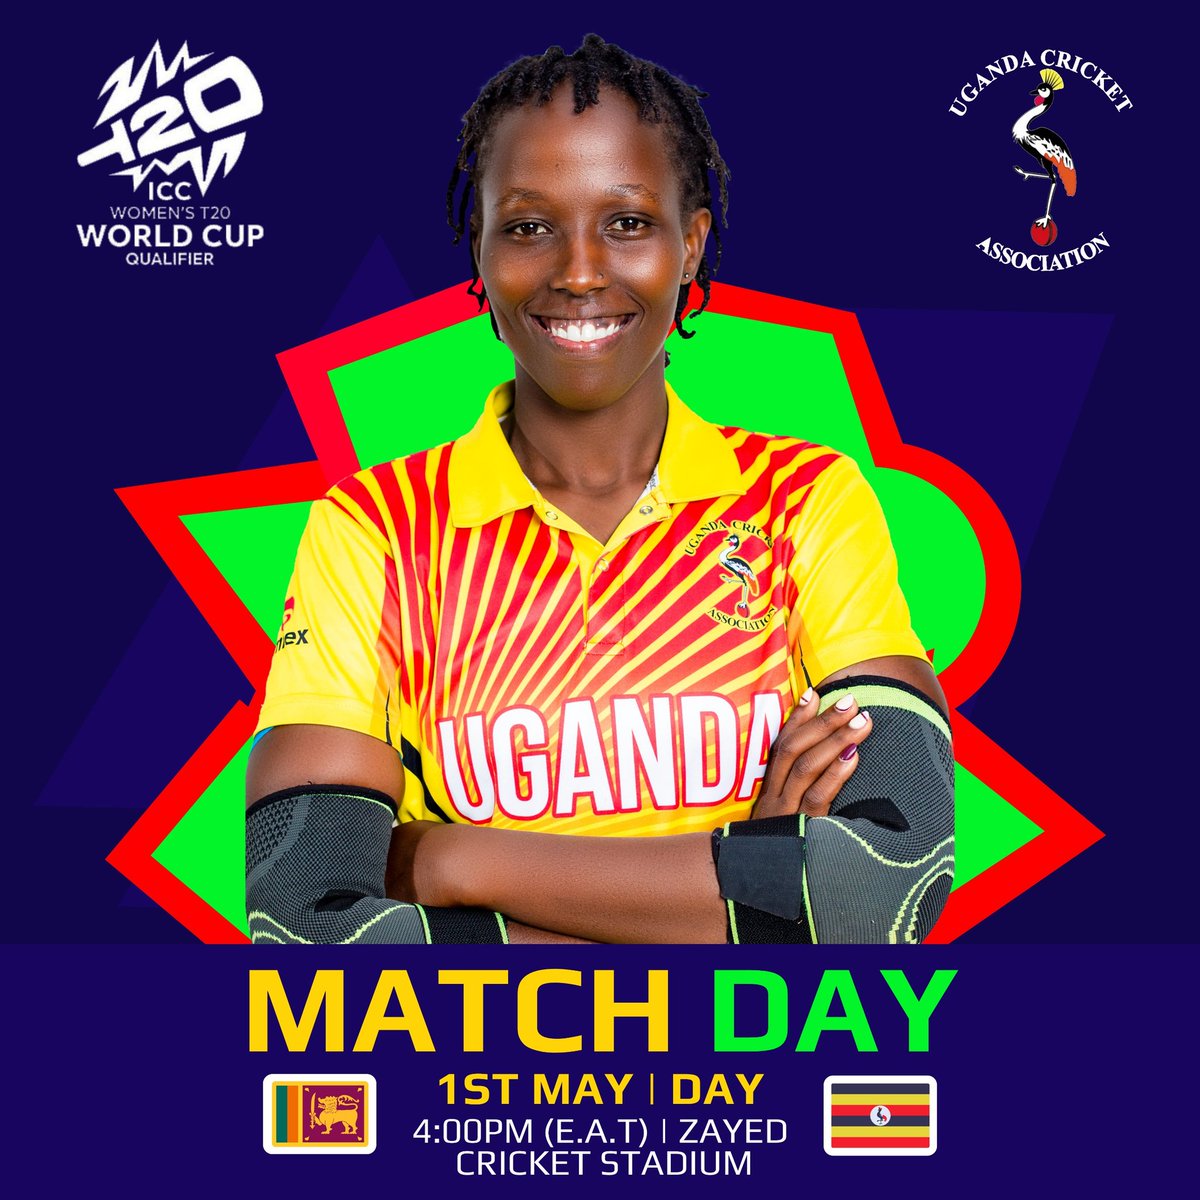 Match Day: ICC T20 Women's Global Qualifiers 

Game 4: Uganda 🇺🇬 W v Sri Lanka 🇱🇰 W 

Last group stage game, dreams still live, let's finish it on a high girls🇺🇬 🇺🇬

Follow game on icc-cricket.com/matches/242987…

Watch on icc.tv

#LetsGoVictoriaPearls
#IvanCricUpdates